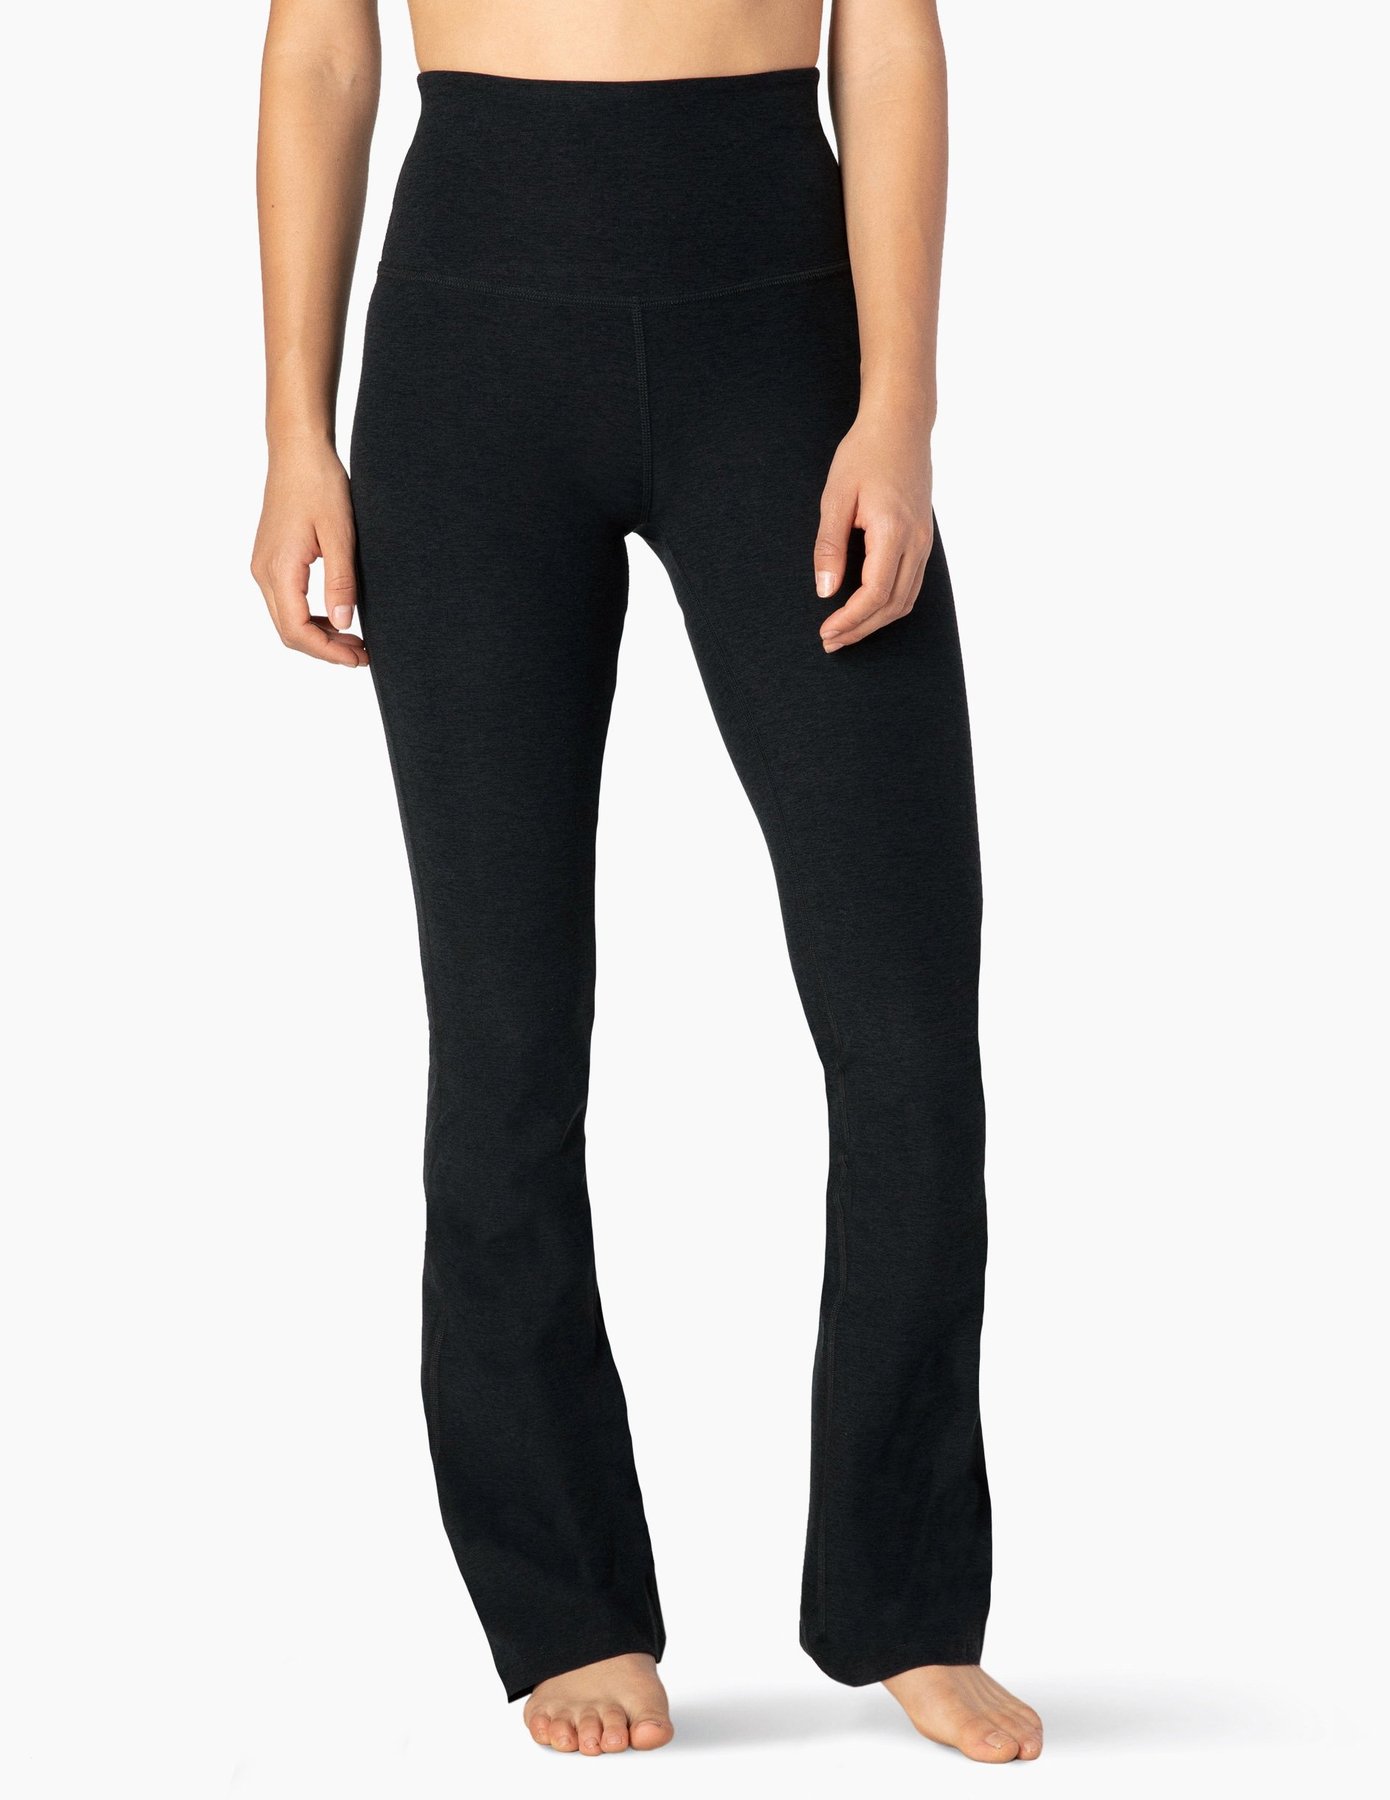 Spacedye High Waisted Women Practice Pant